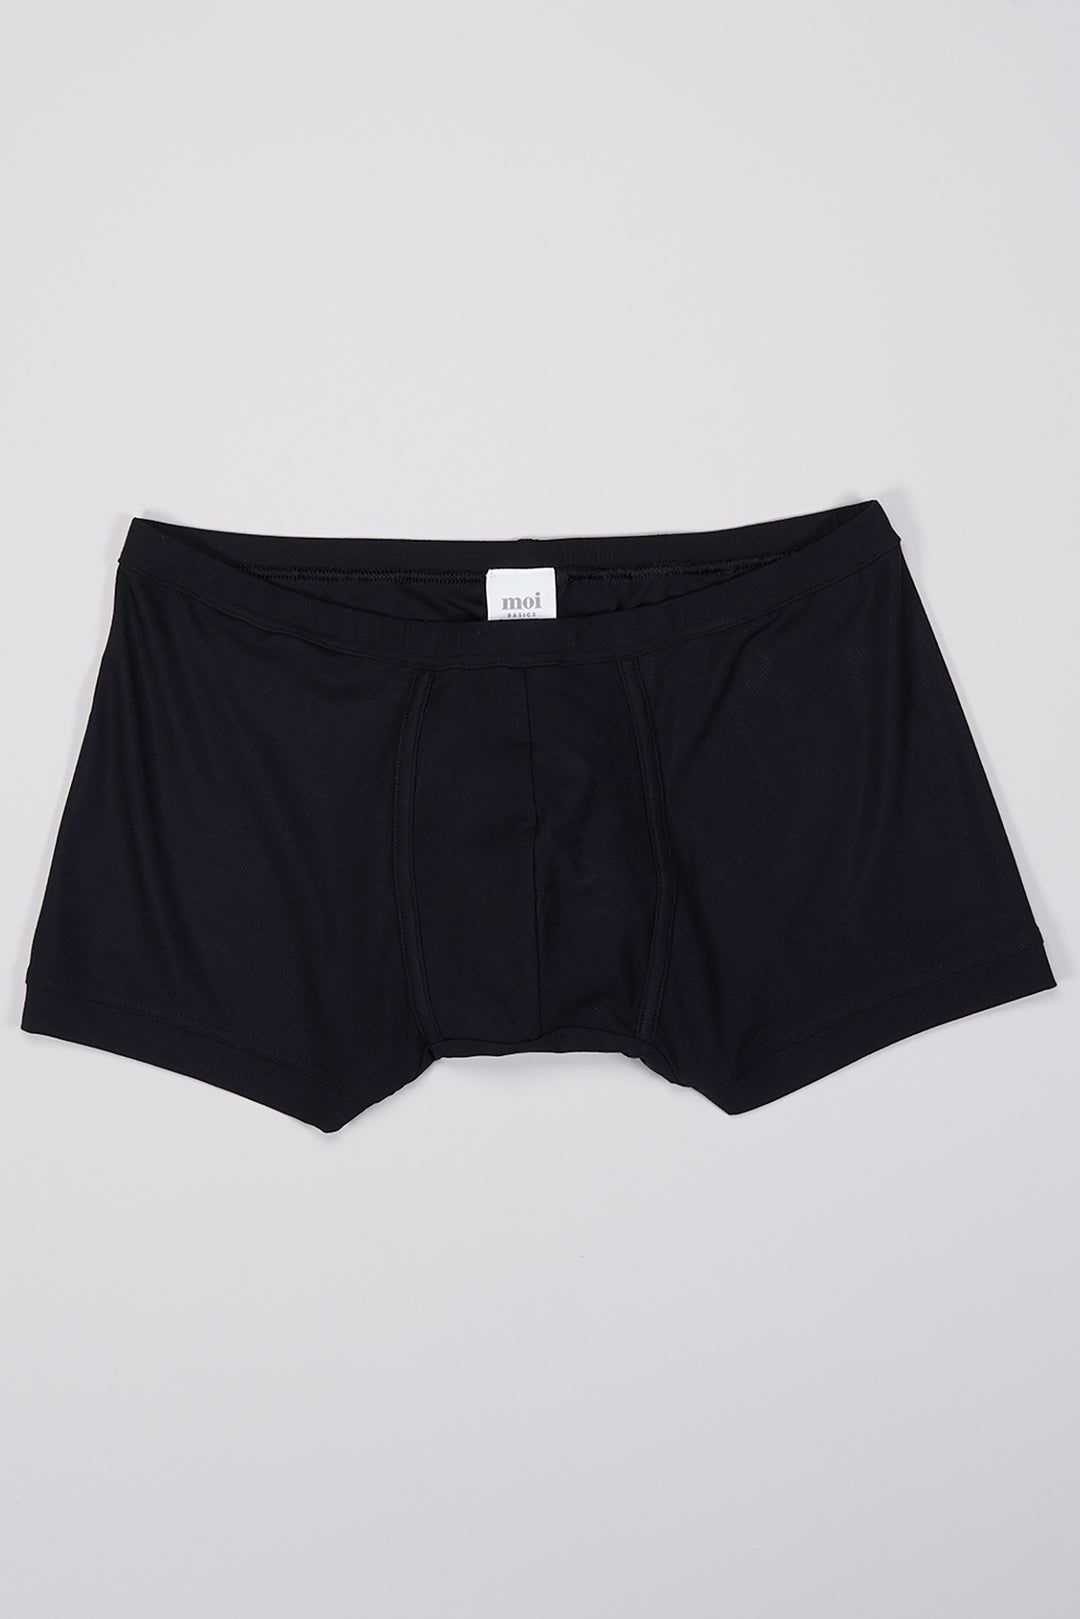 comfortable, organic, gentlemanly boxerbrief